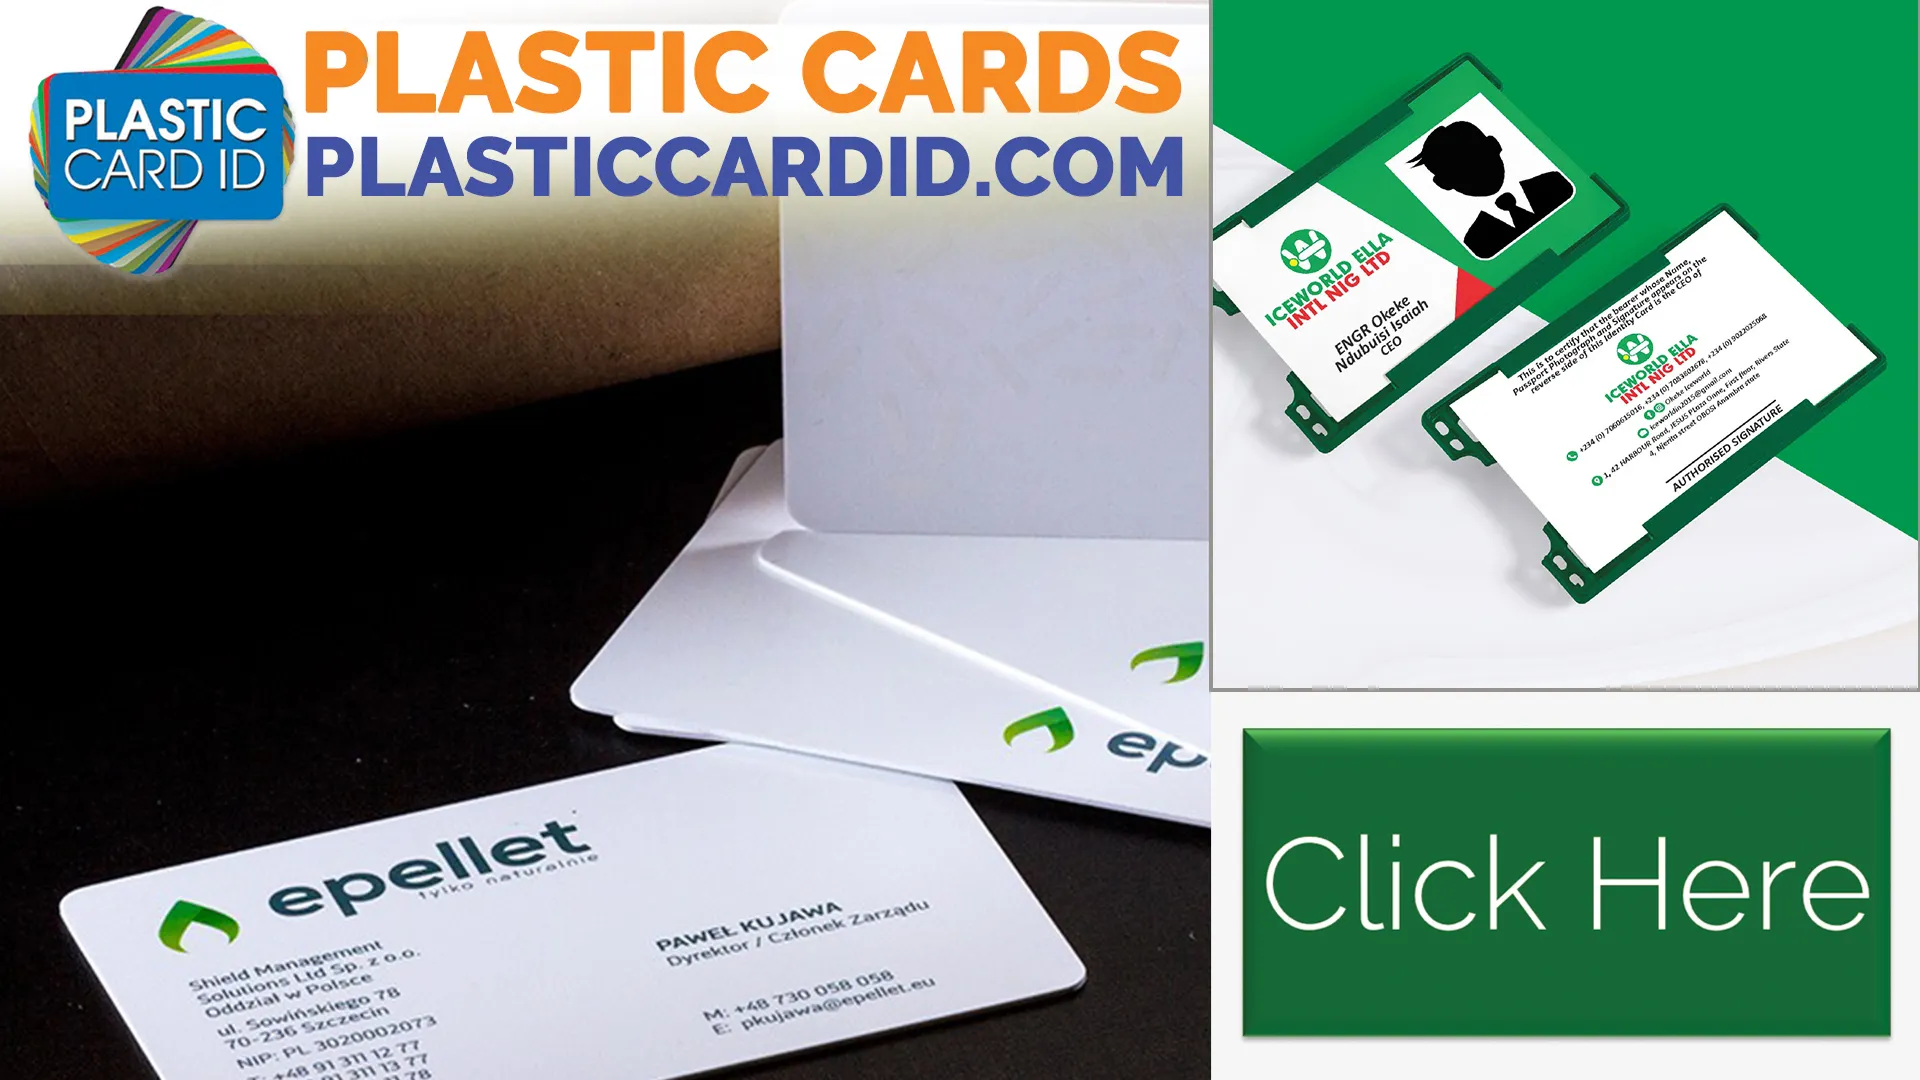  Your Partner in Smart Spending for Plastic Card Projects